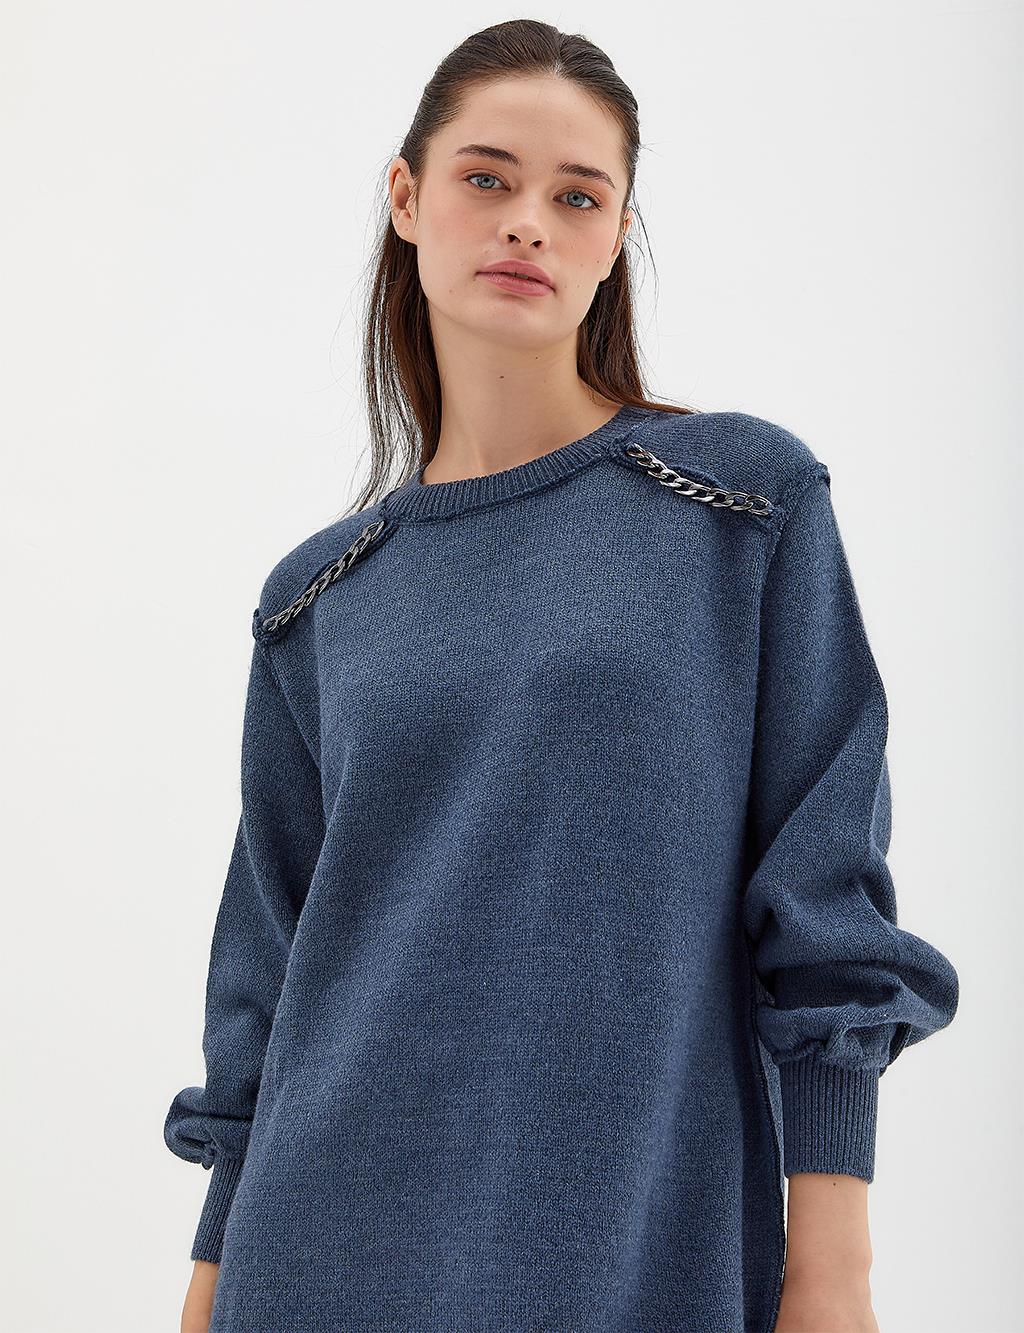 Knitwear Tunic With Chain Detail On The Shoulder, Dark Blue